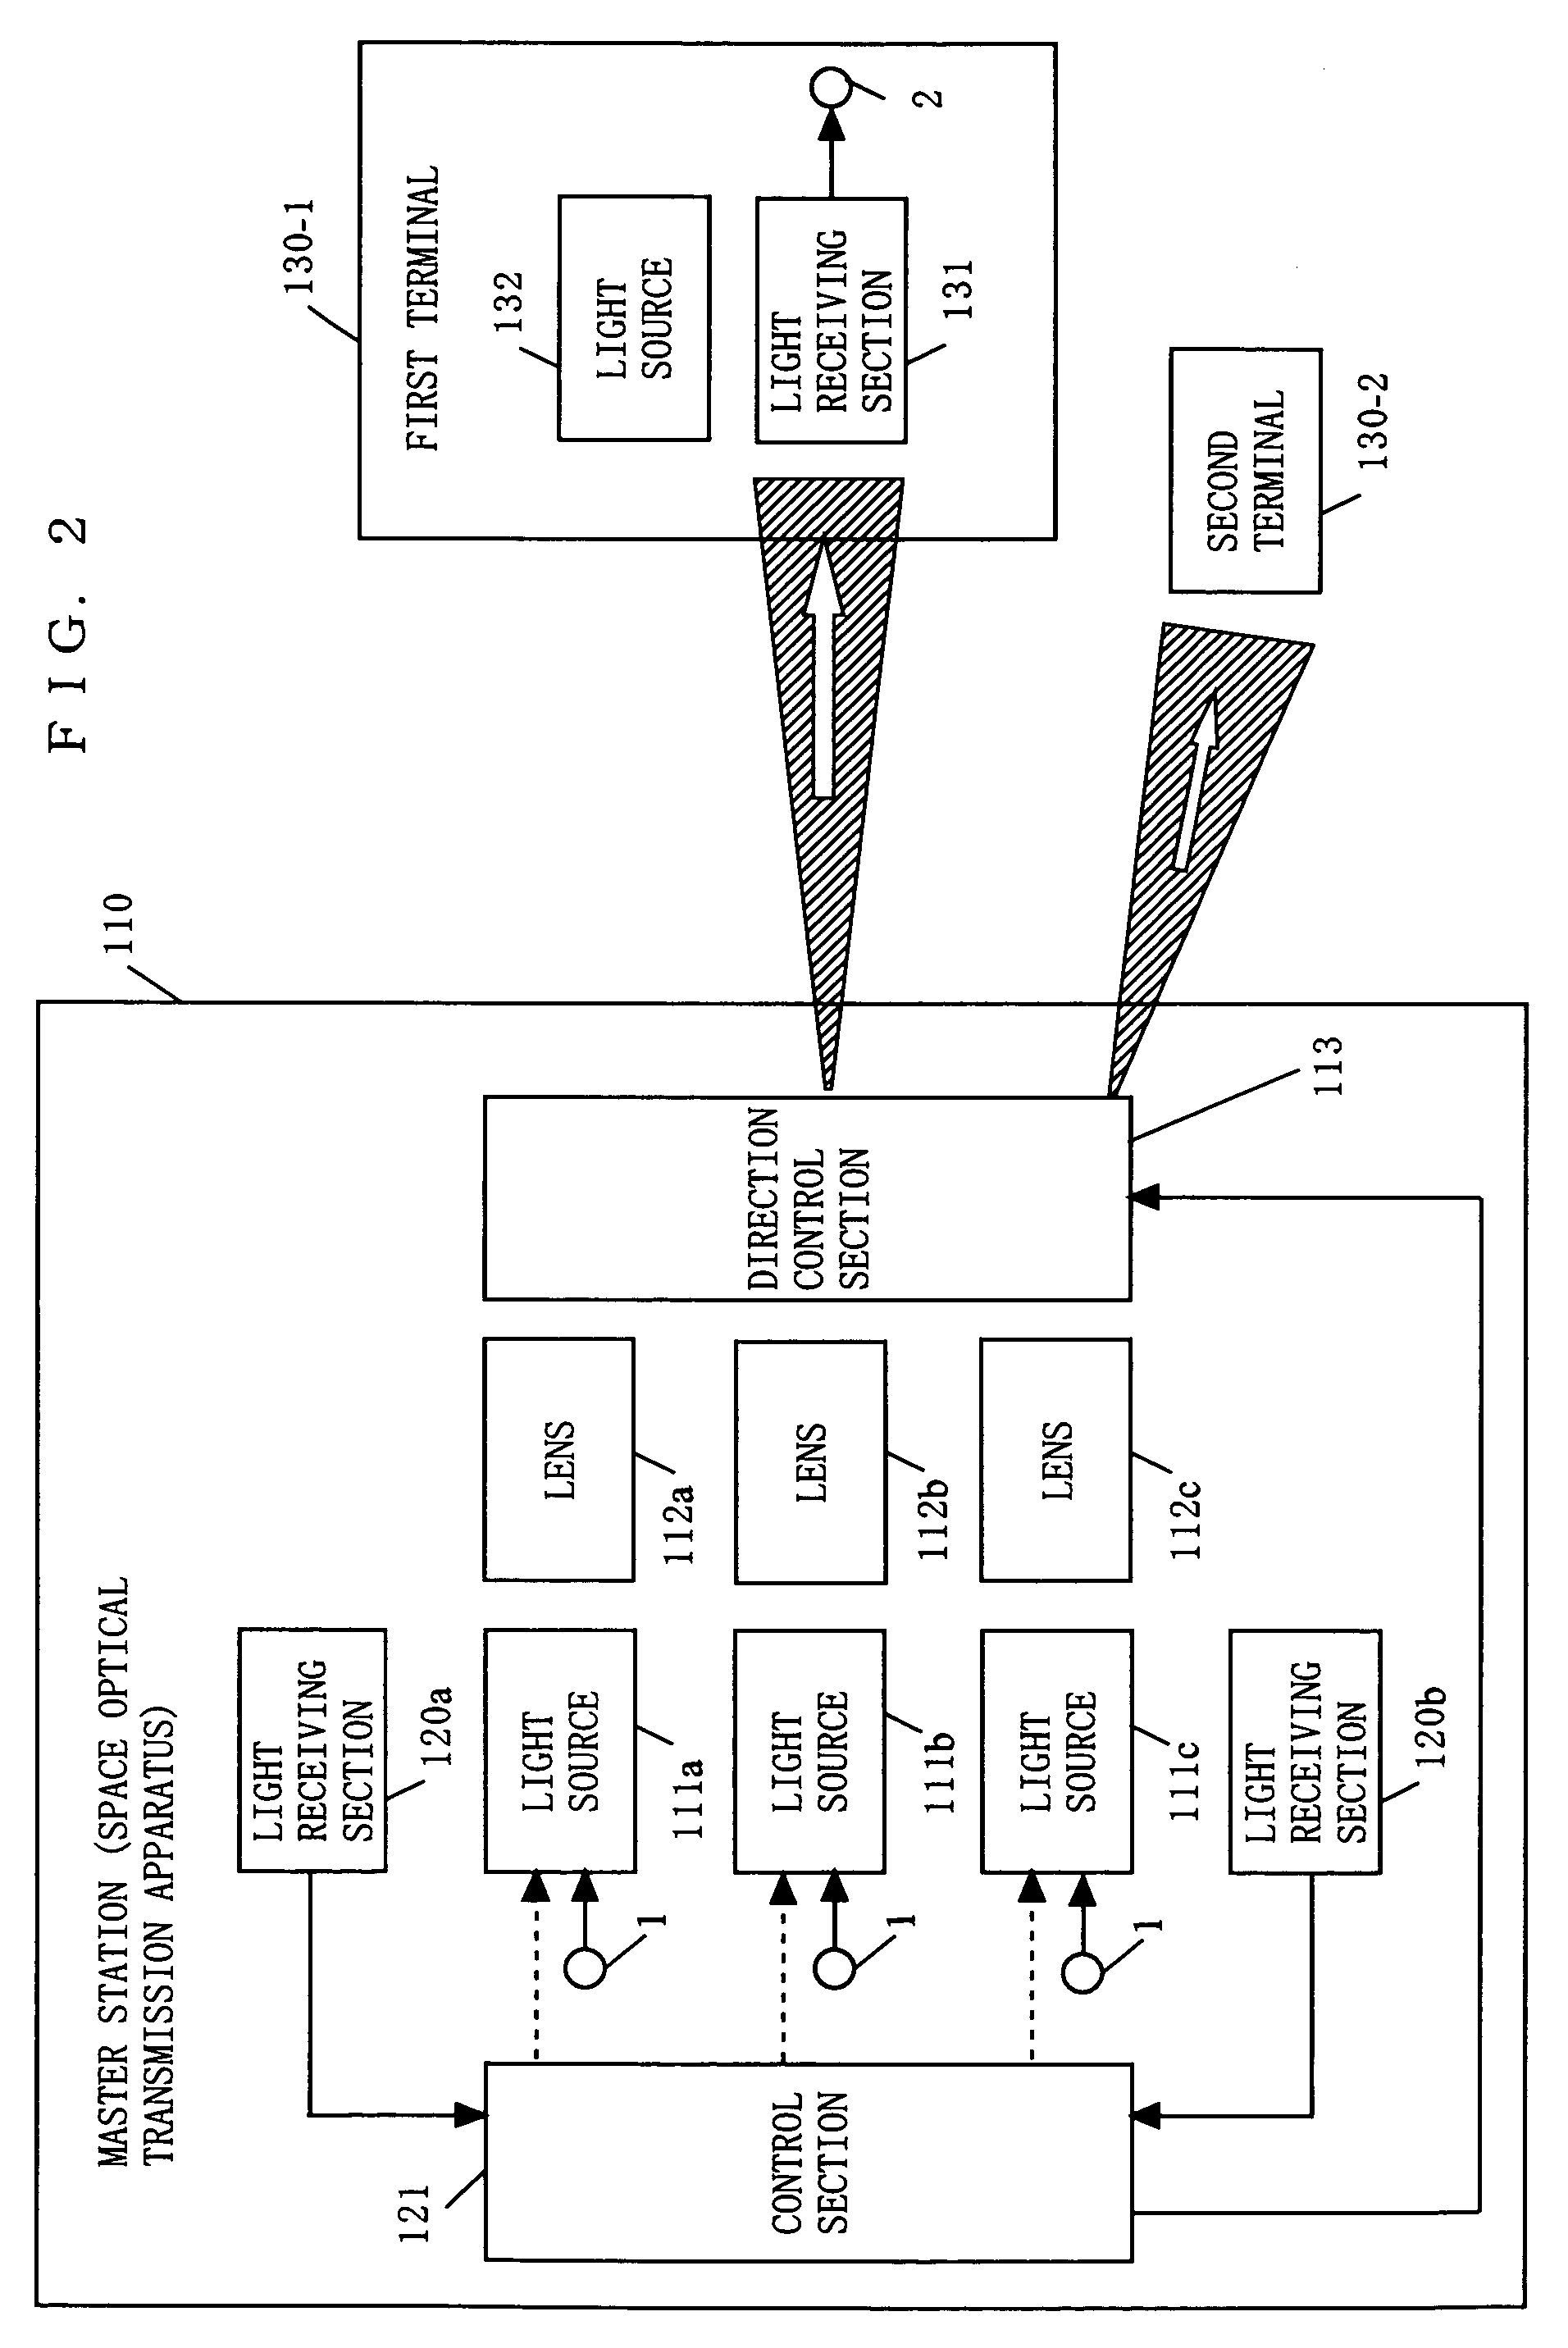 Space optical transmission apparatus and space optical transimission system